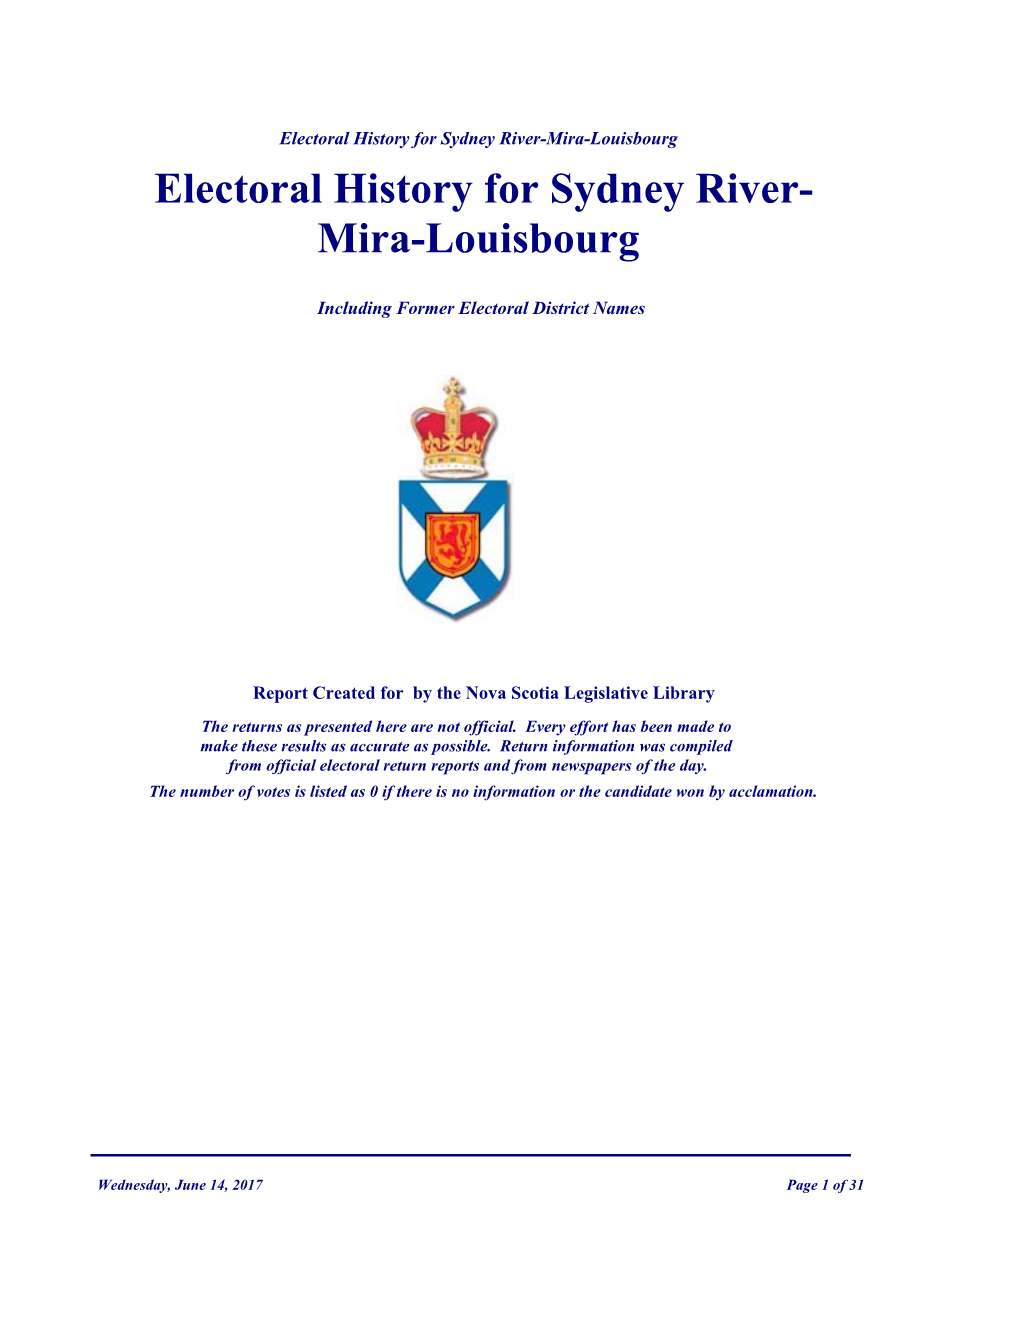 Electoral History for Sydney River-Mira-Louisbourg Electoral History for Sydney River- Mira-Louisbourg